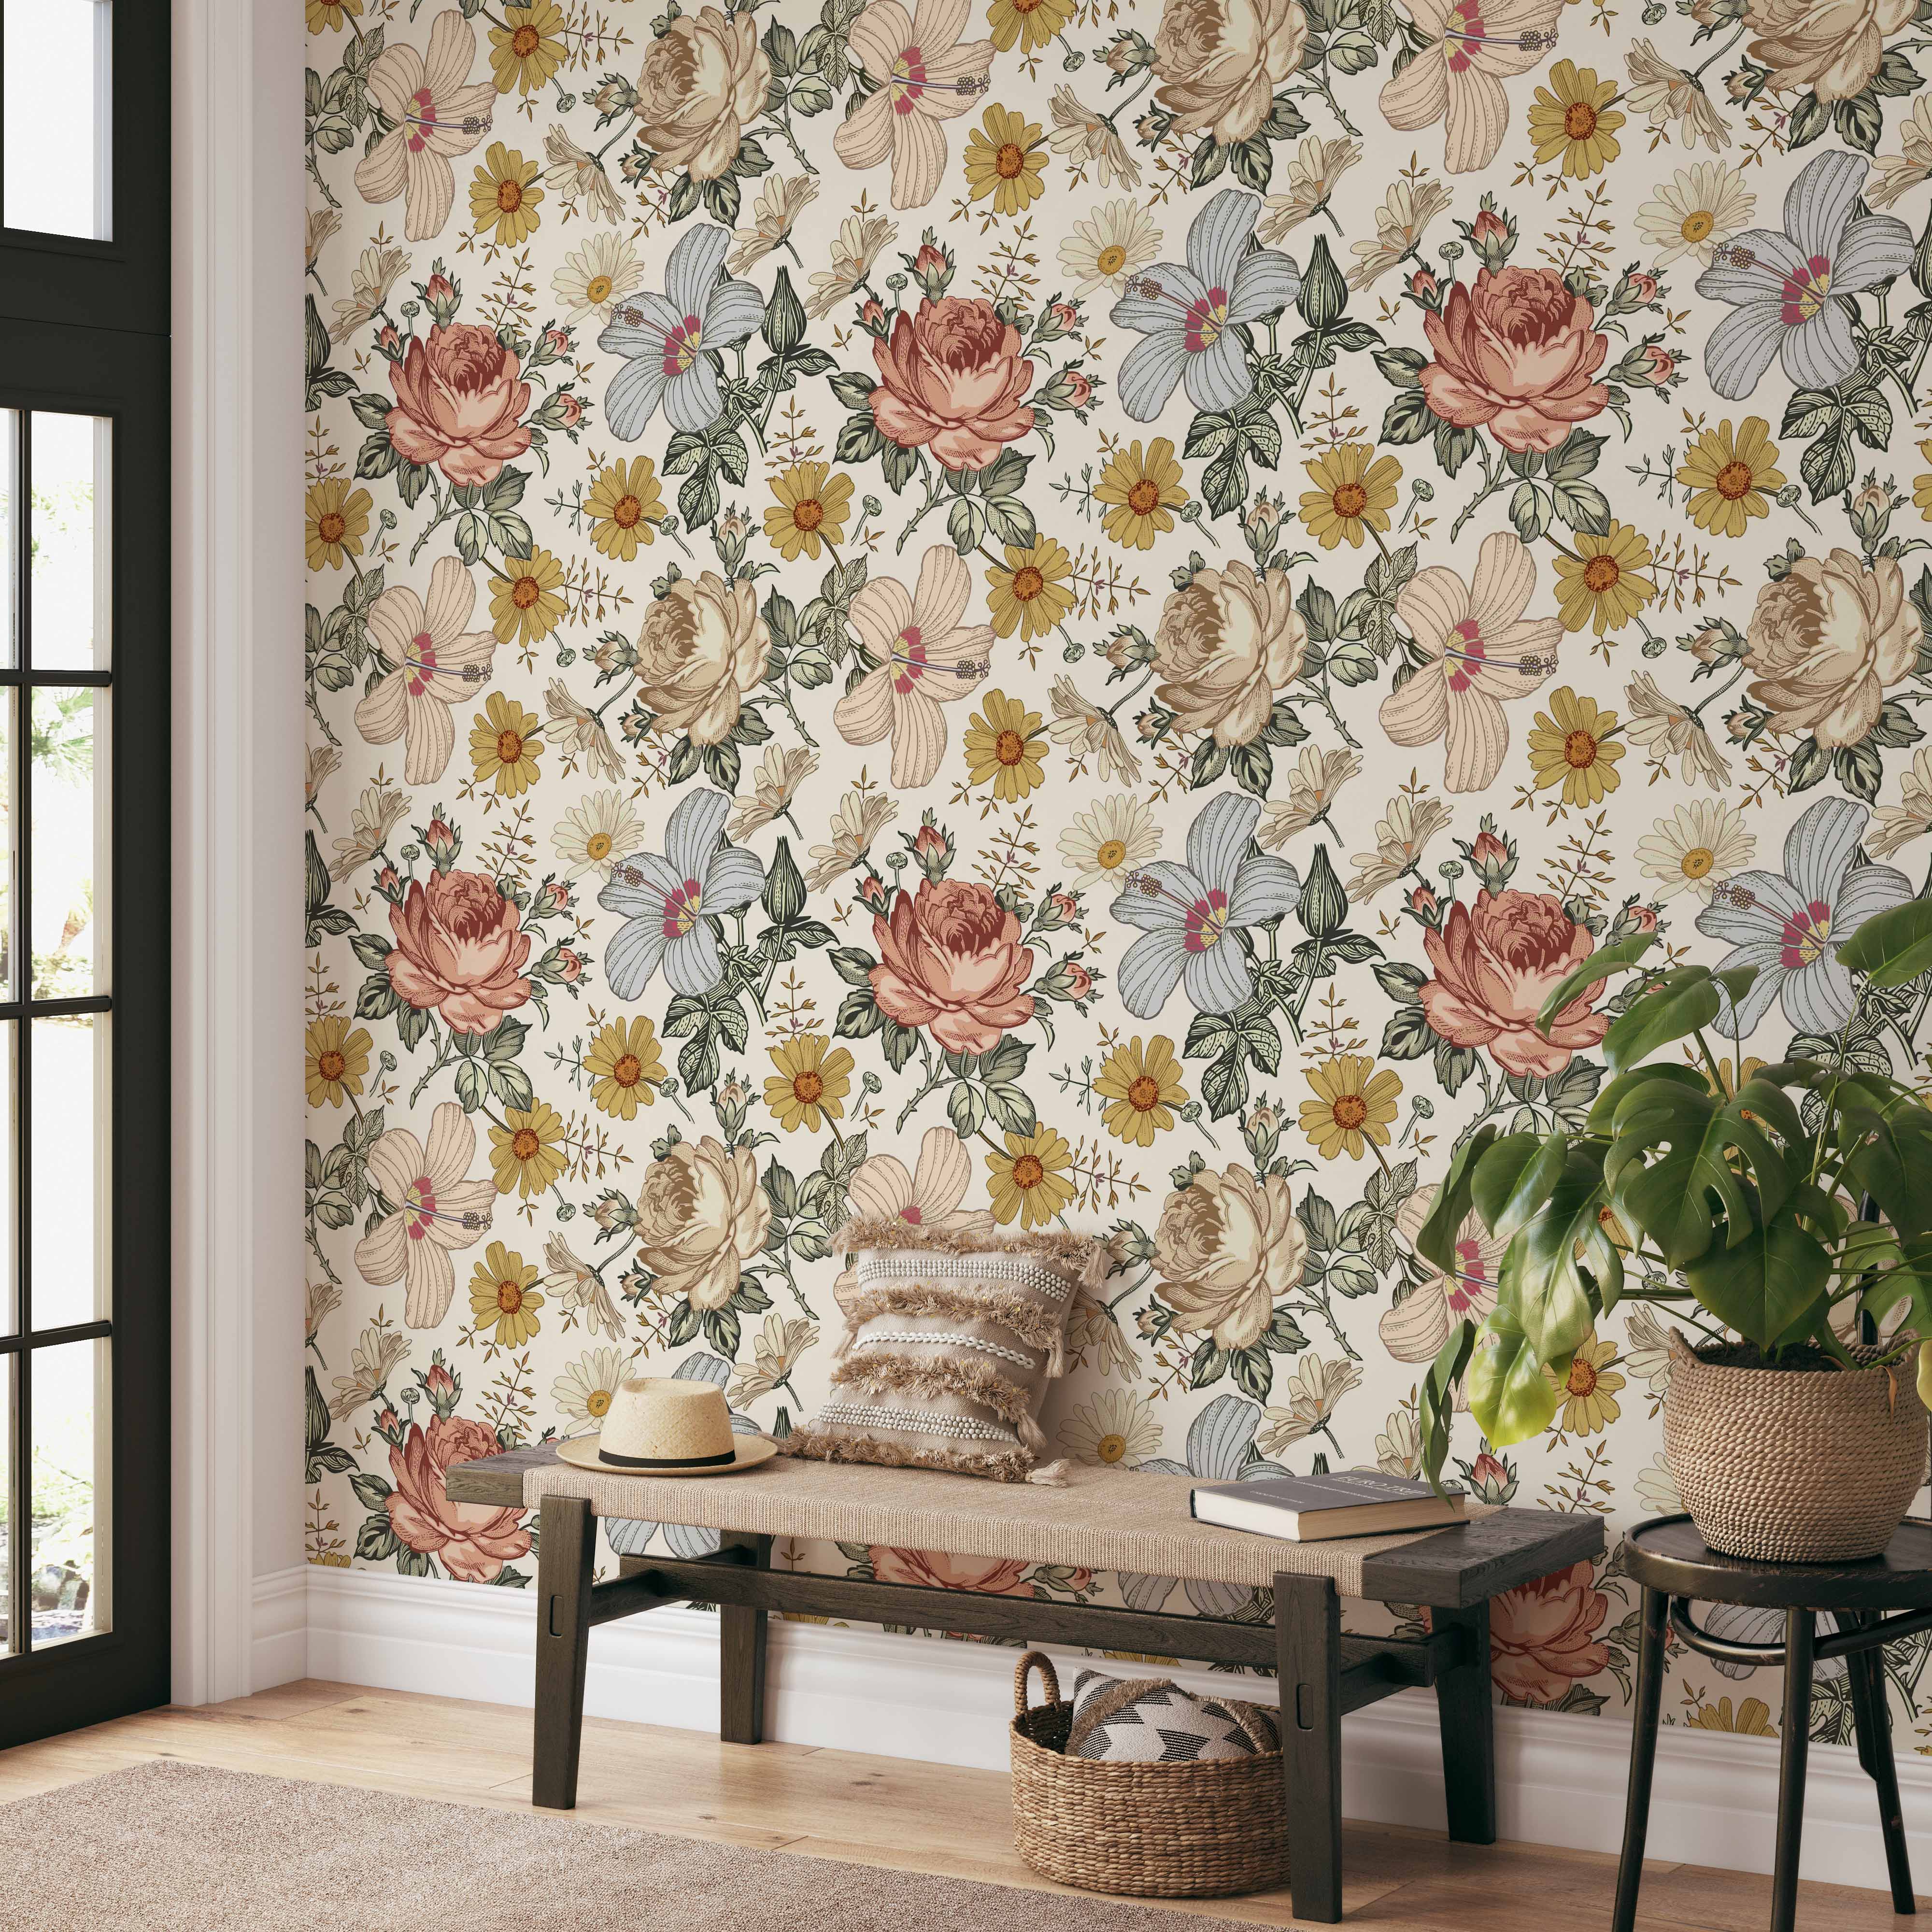 Vintage Wallpaper Floral Removable Wallpaper Peel and Stick Wall mural   Scandi Home